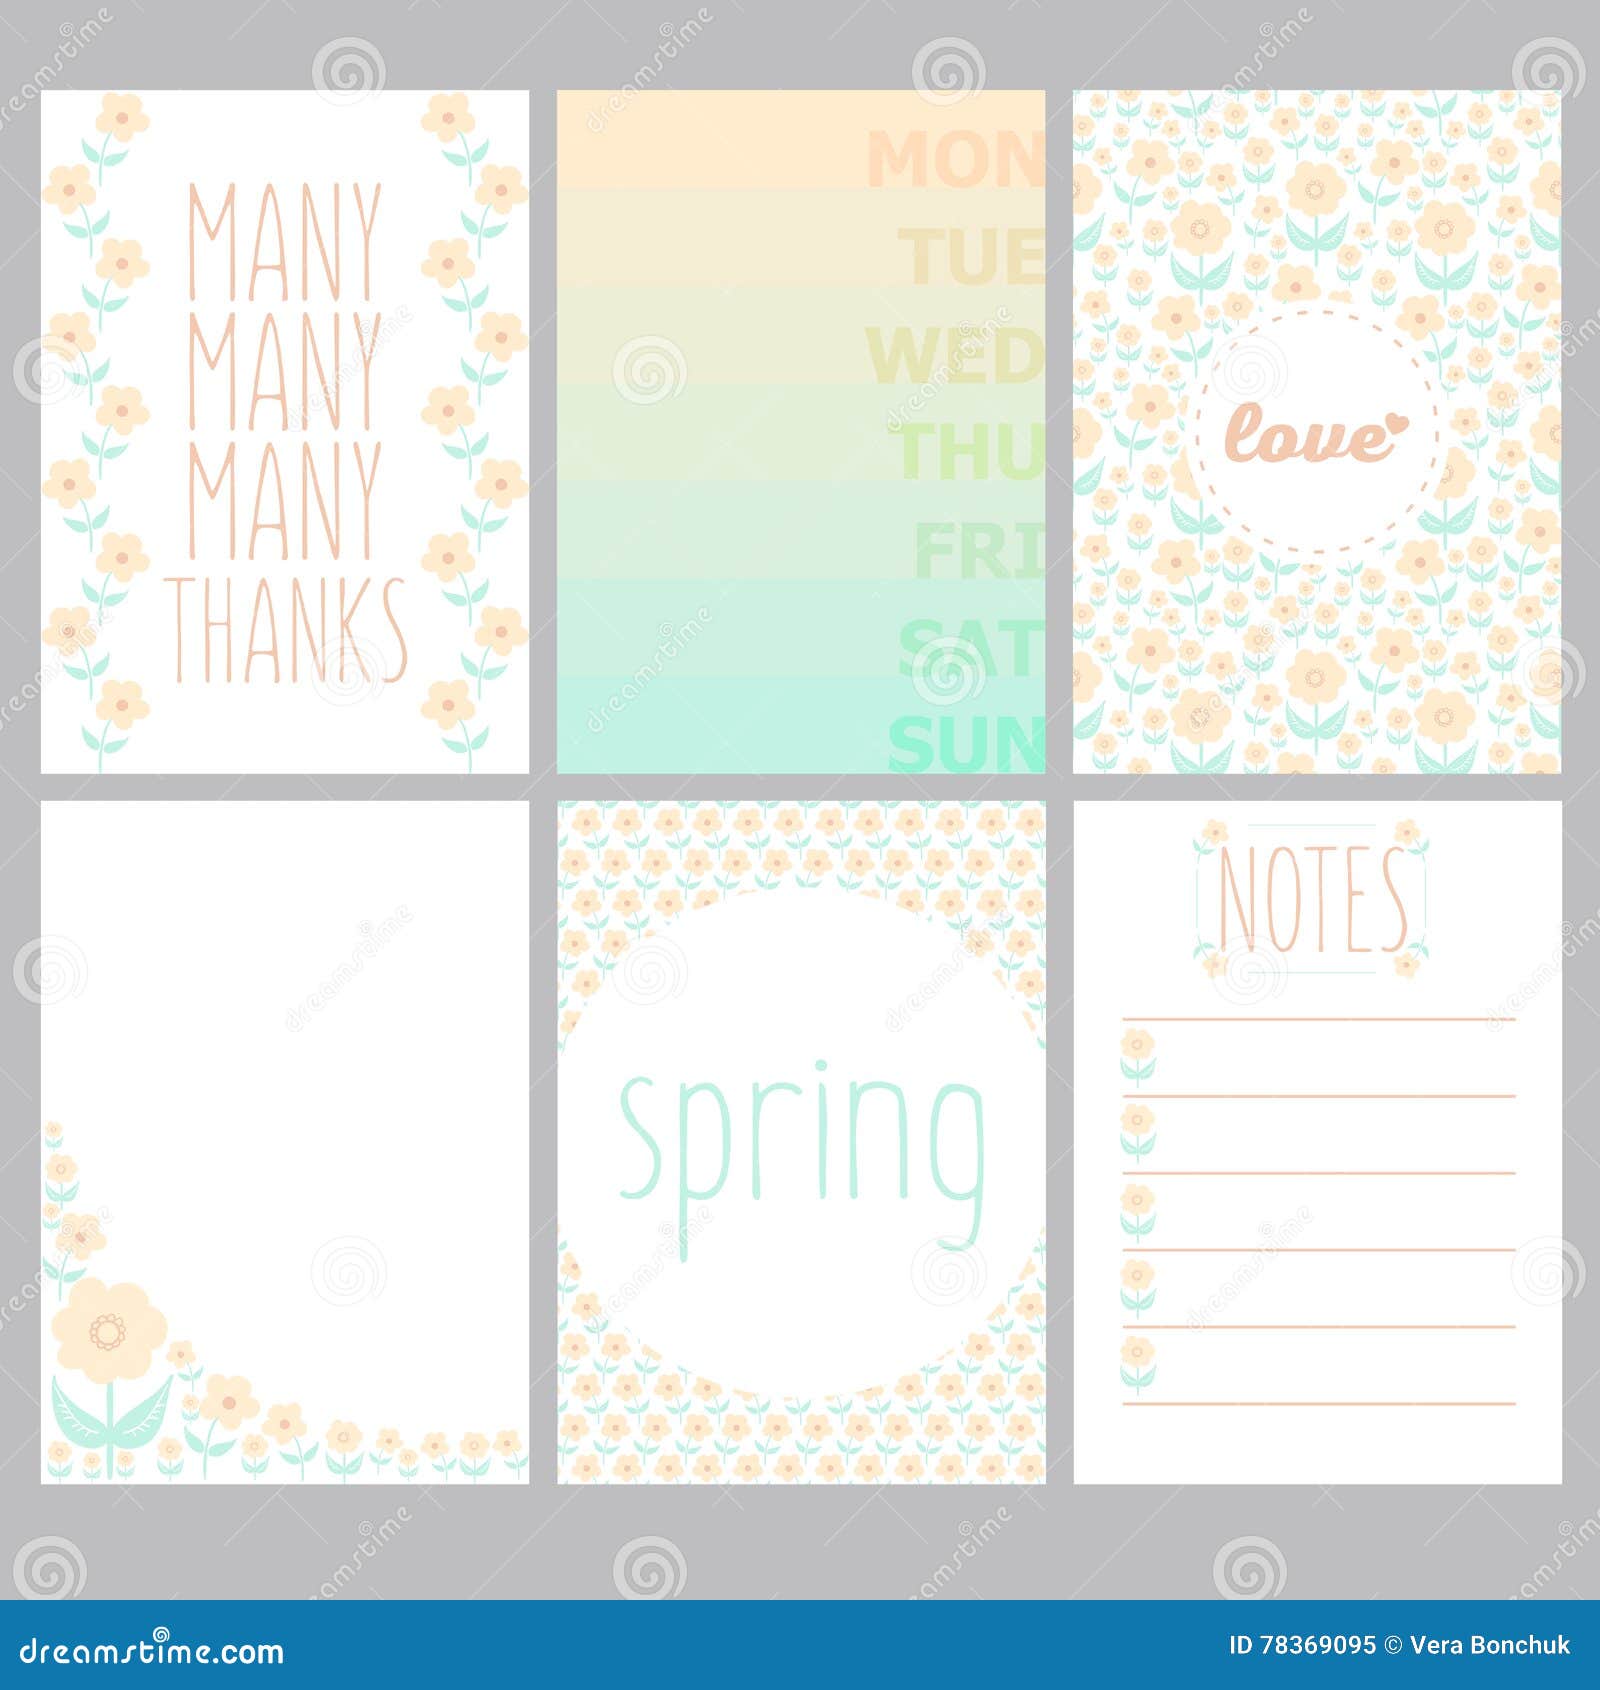 20-spring-journal-prompts-for-reflection-and-seasonal-goal-setting